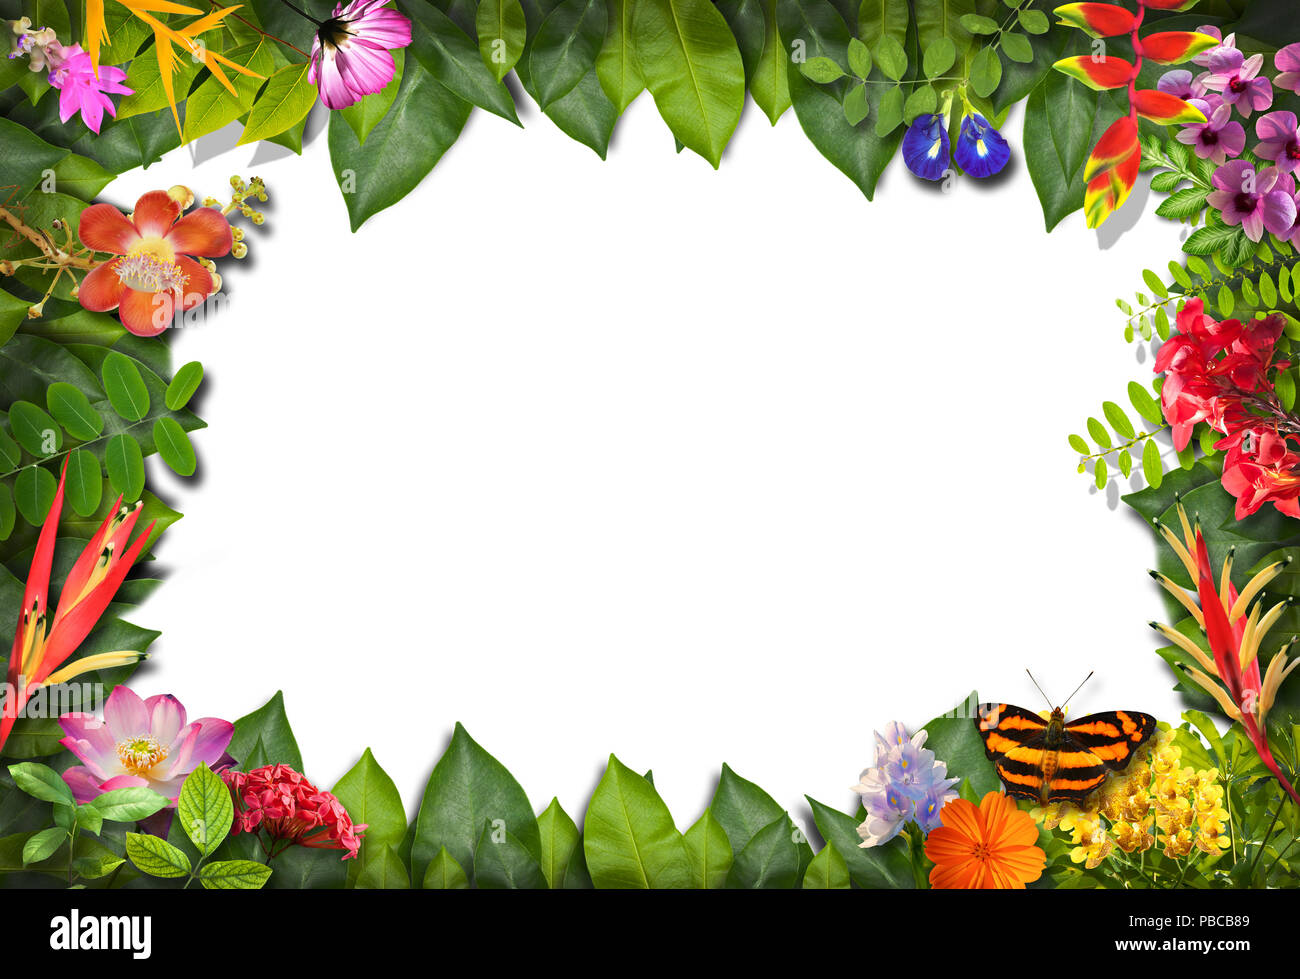 Nature border with flower and green leaf background Stock Photo - Alamy